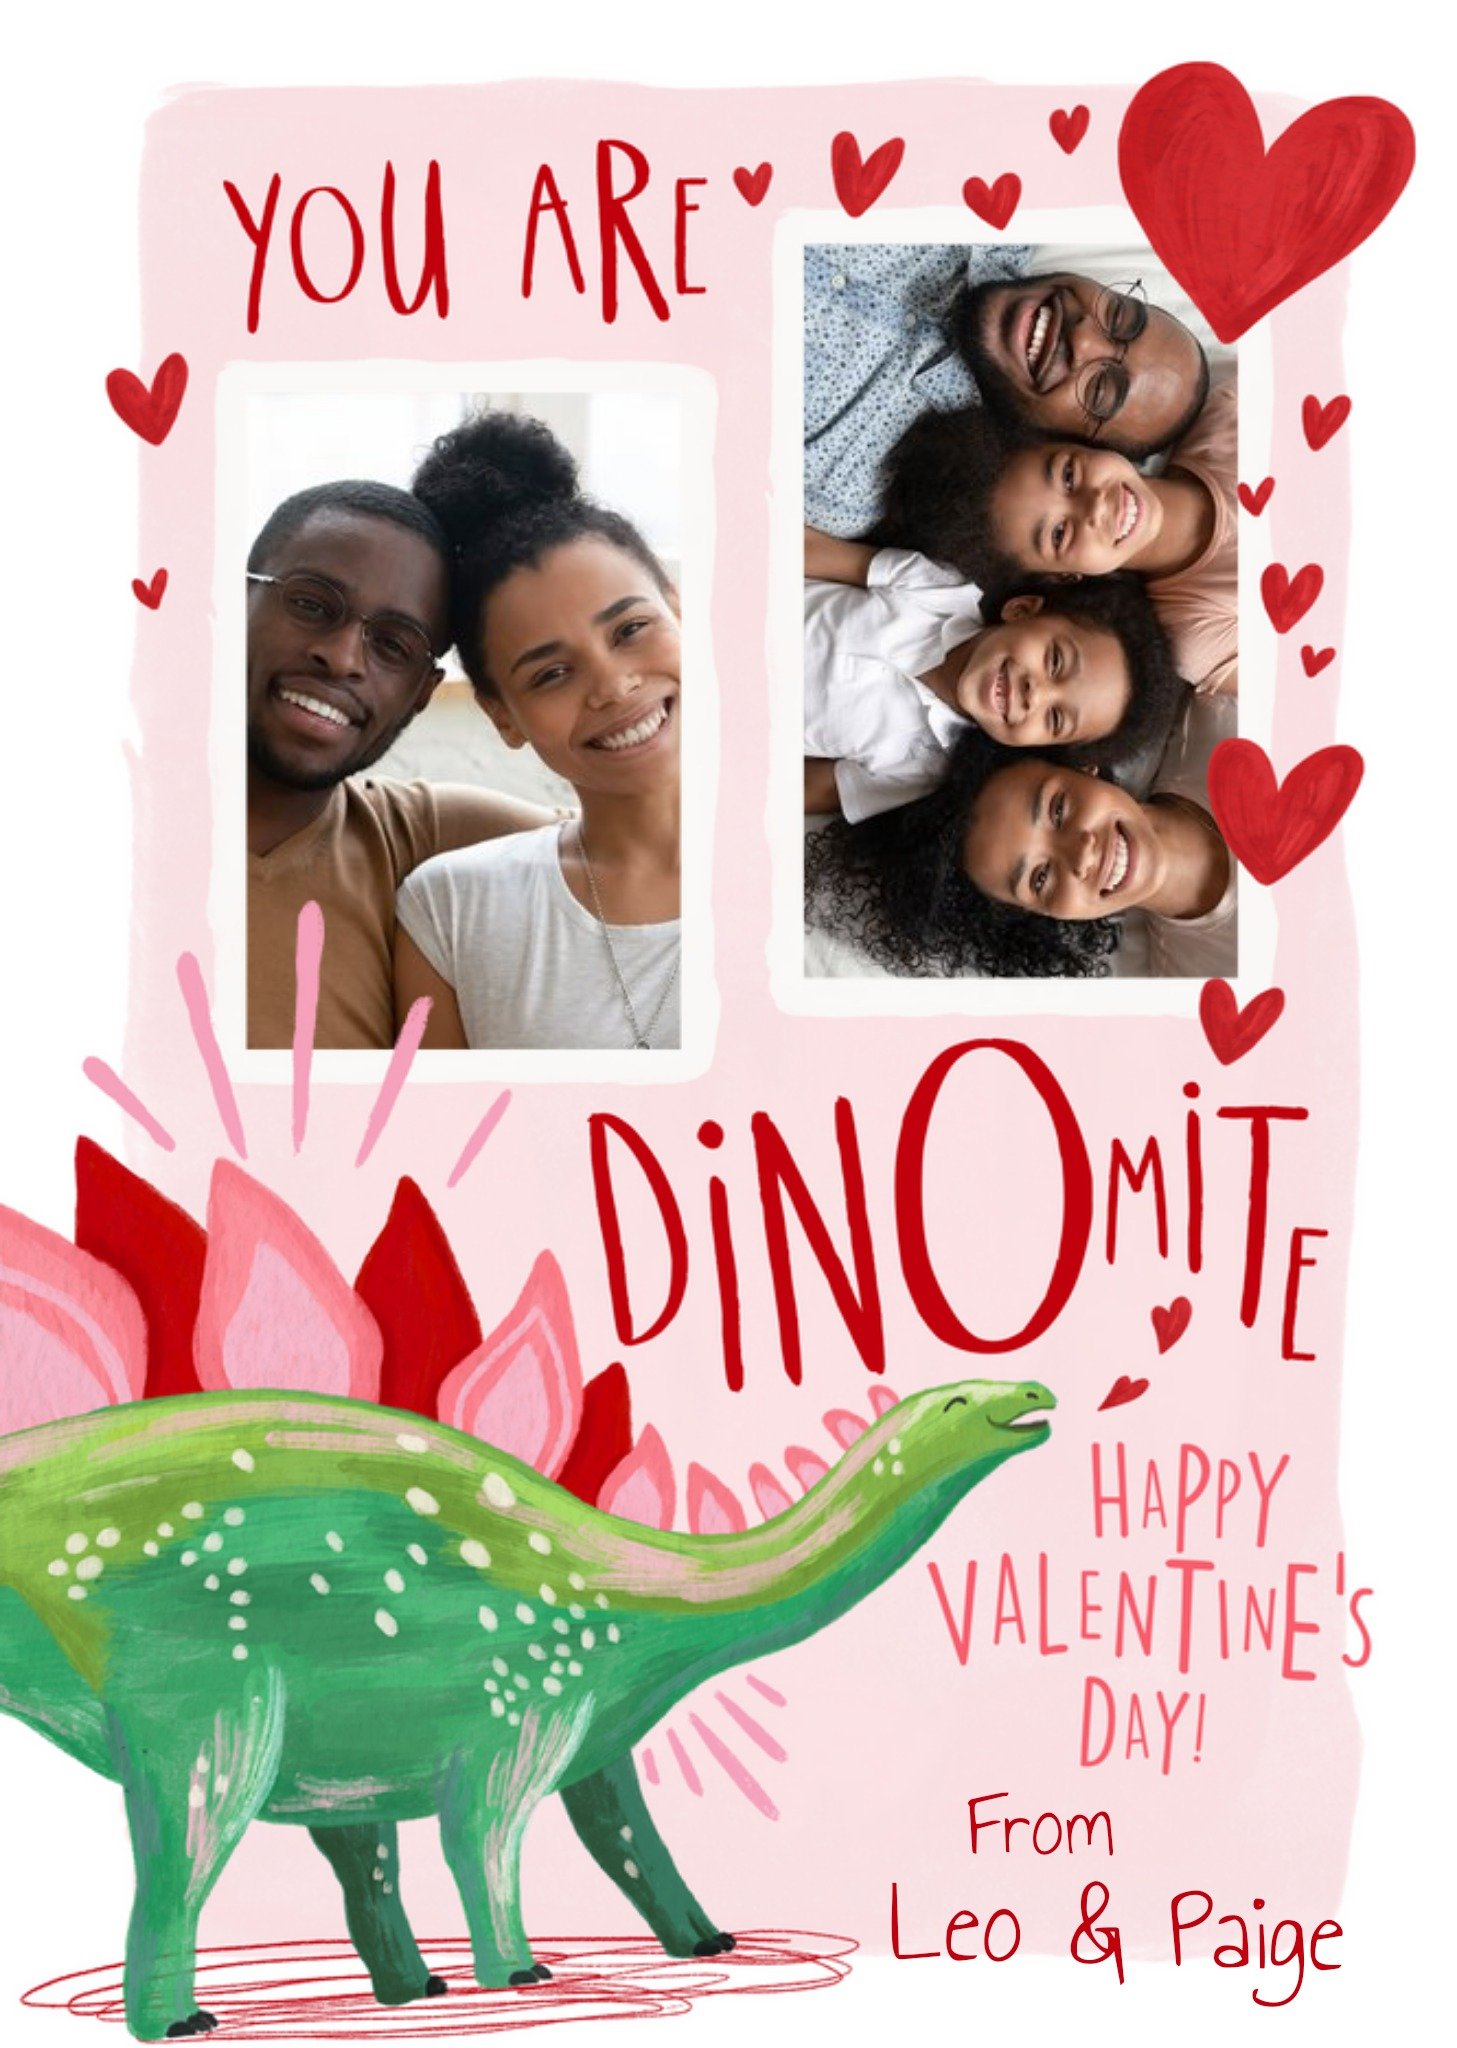 The Natural History Museum Natural History Museum Illustrated You Are Dinomite Photo Upload Valentin